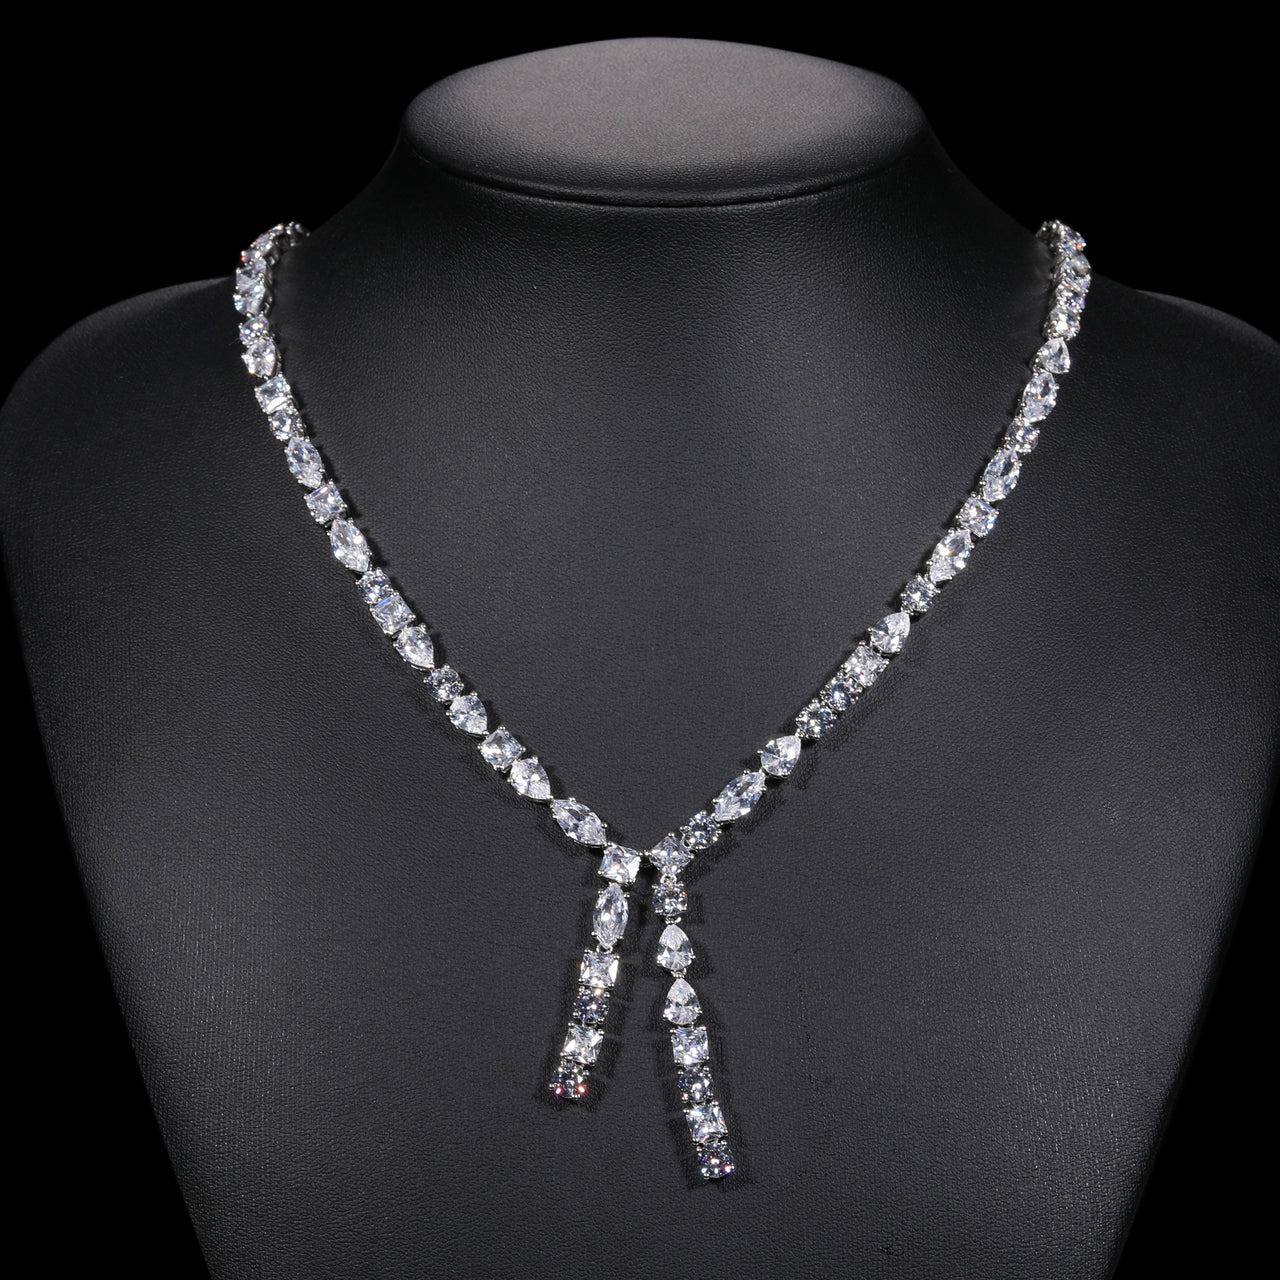 5MM PEAR MARQUISE CUT MOISSANITE DROP TENNIS CHAIN NECKLACE/BRACELET IN STERLING SILVER